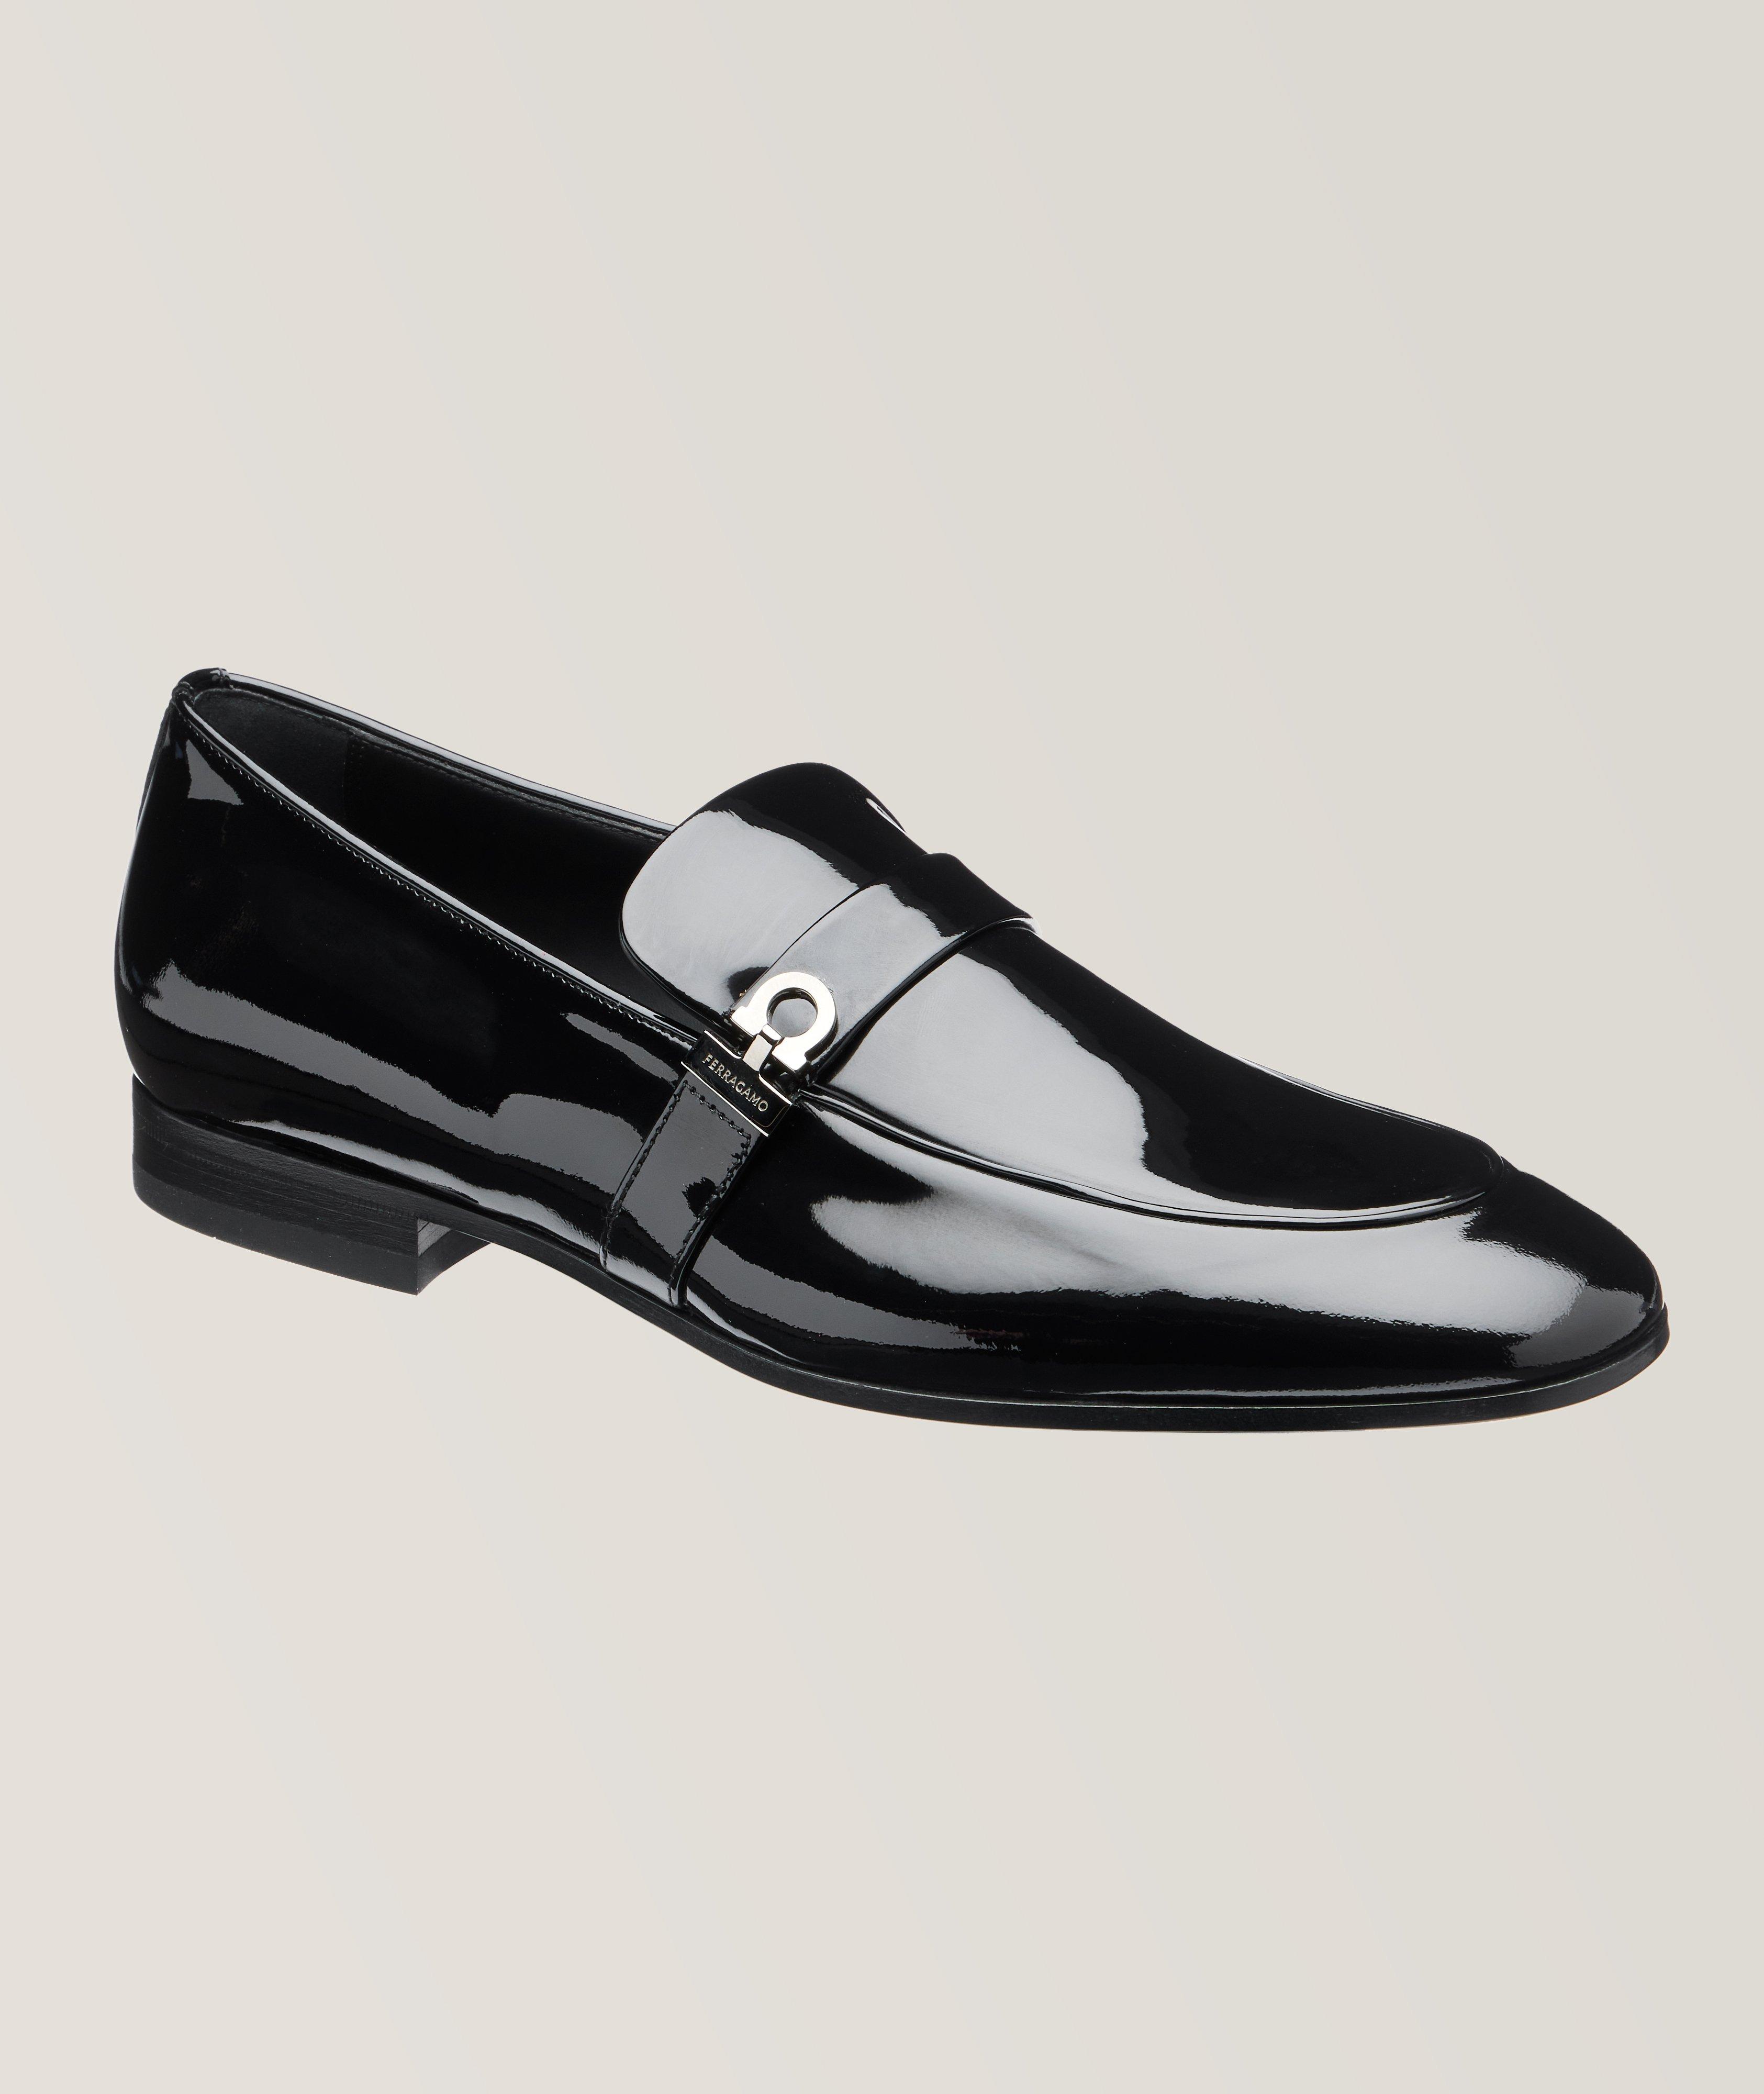 Deal Gancio Bit Ornament Patent Leather Loafers image 0